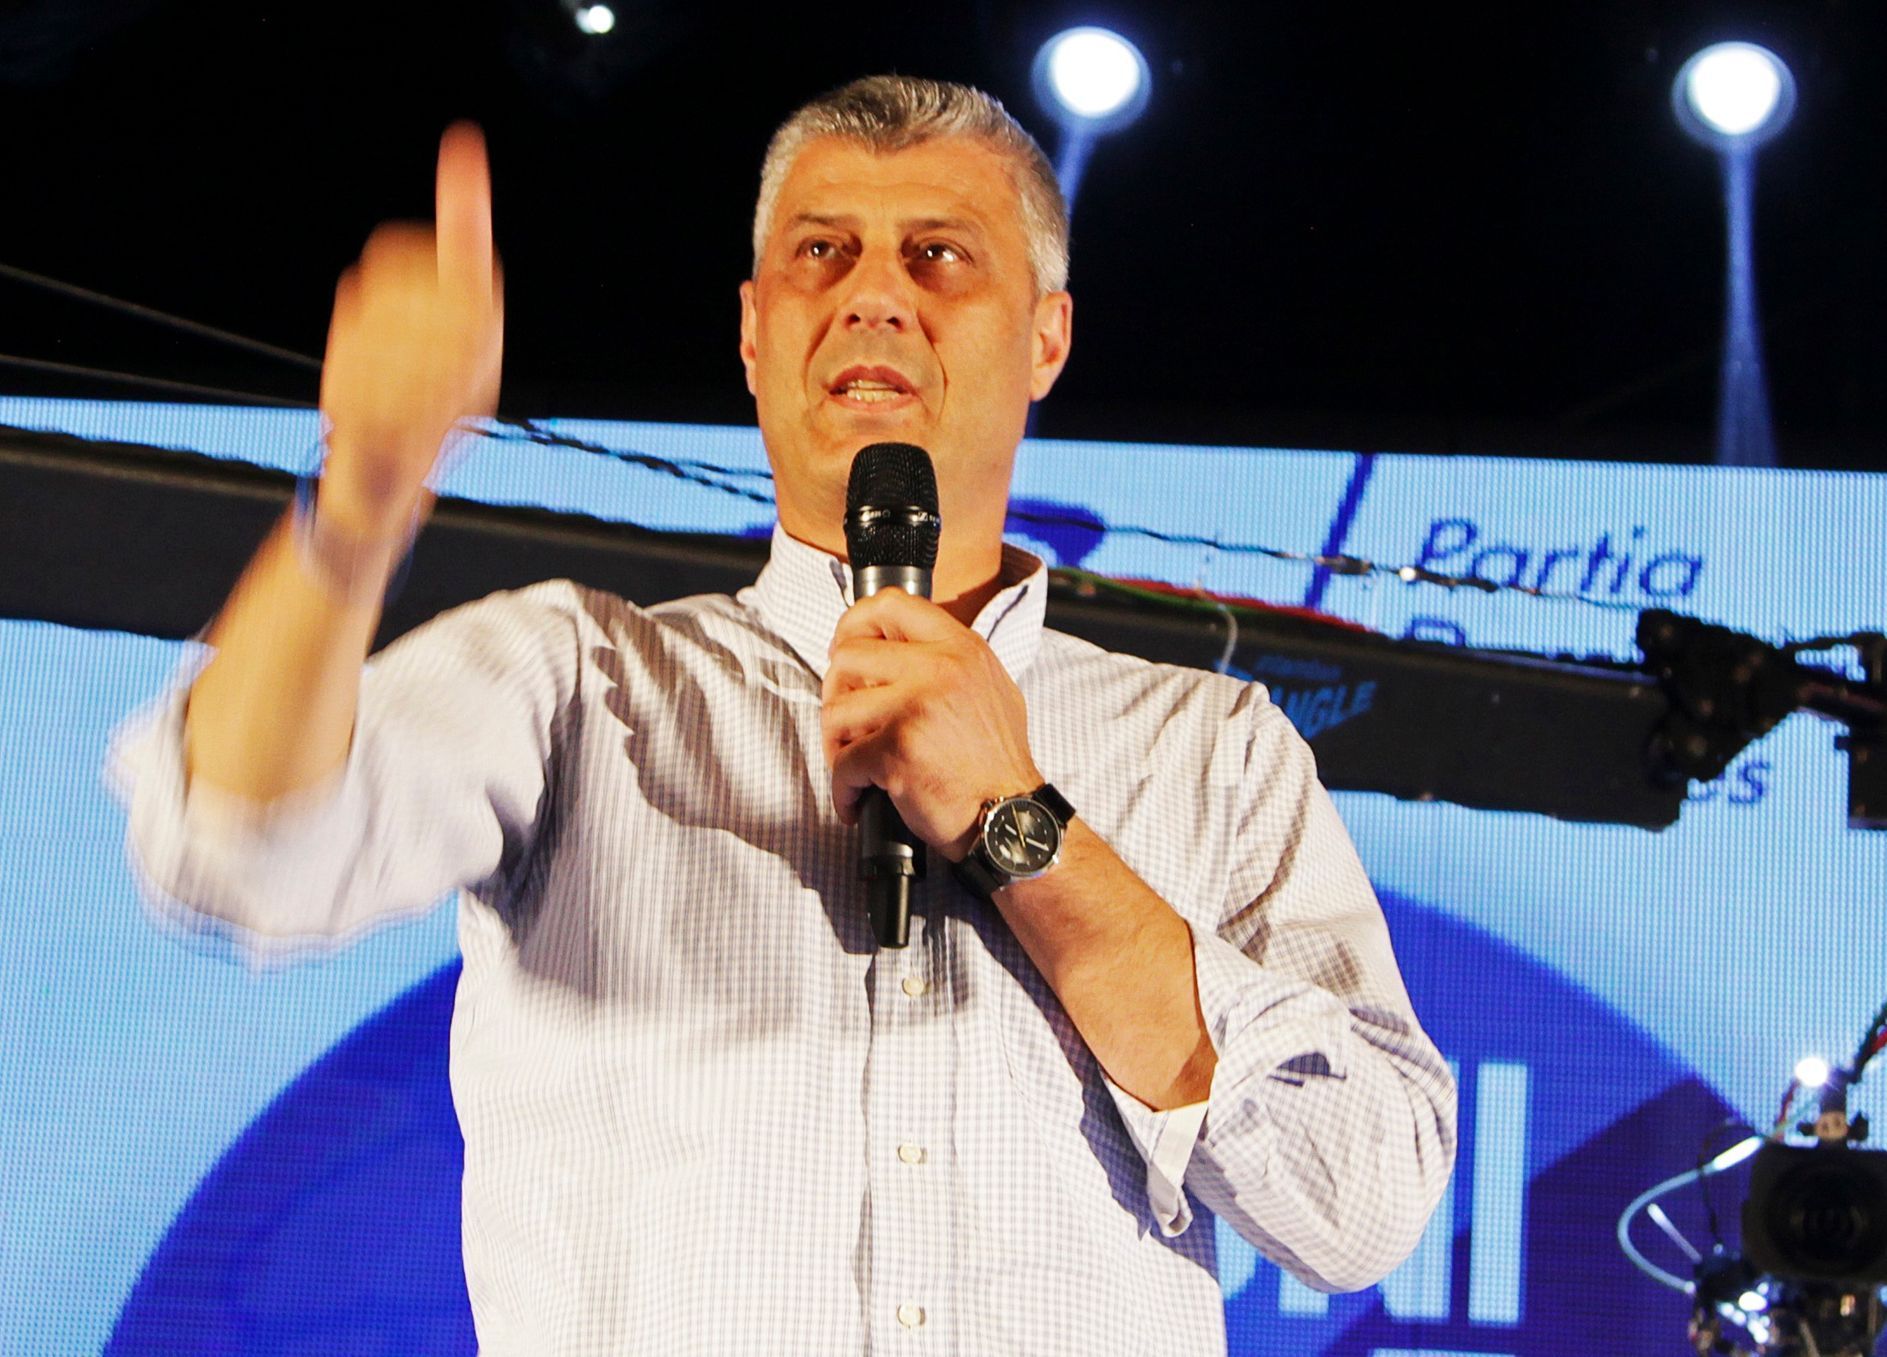 Kosovo PM Thaci speaks during a campaign rally in Gjakova